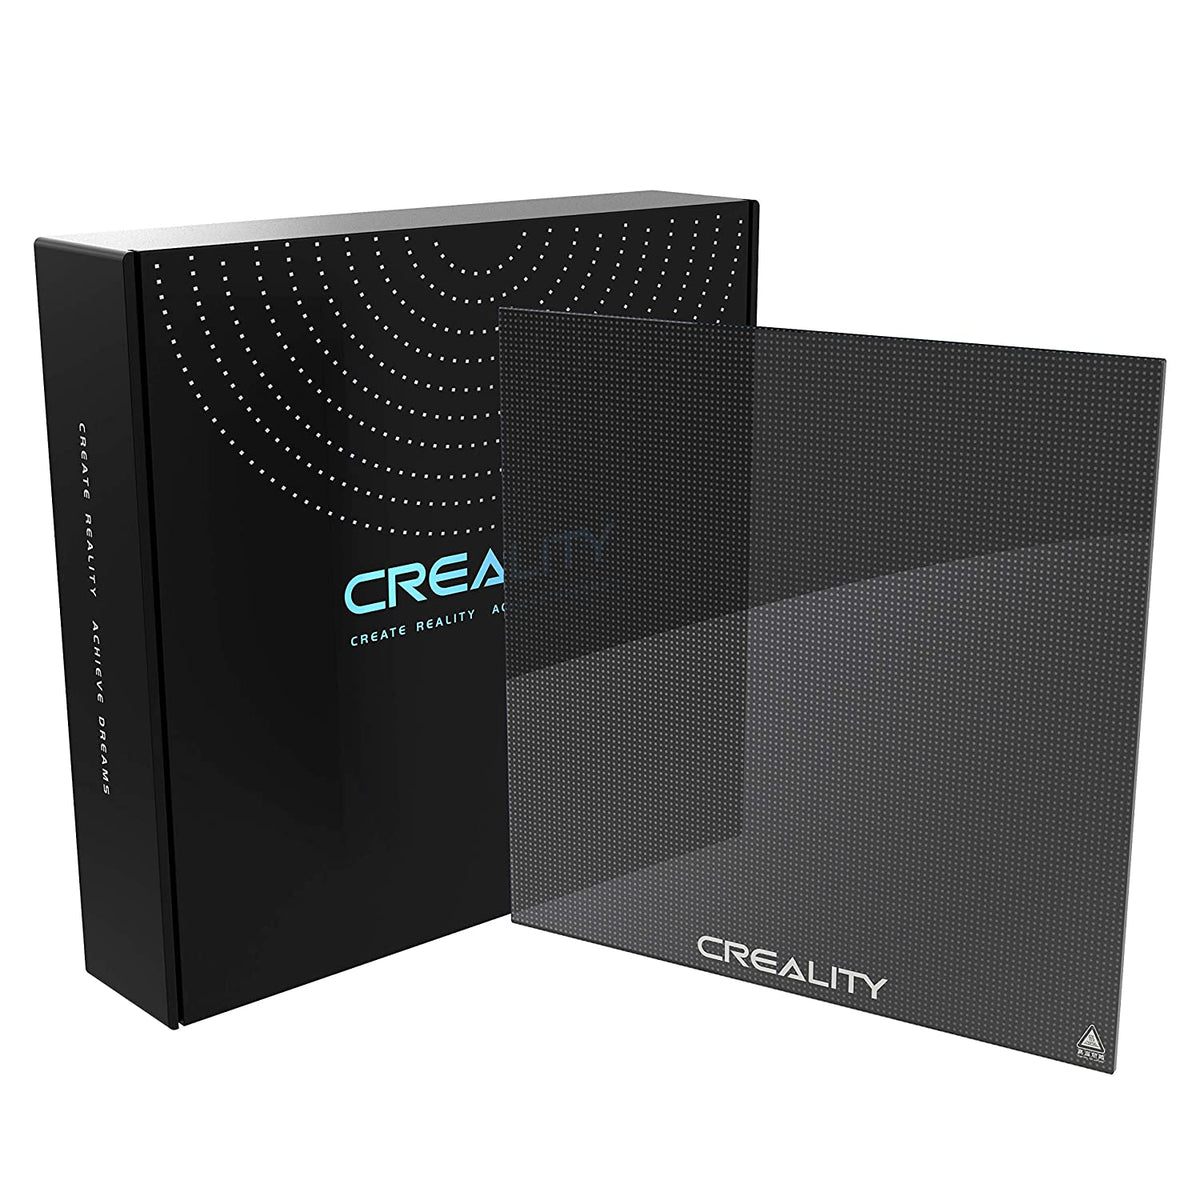 Creality Ender 3 Glass Bed 235x235mm – Official Creality3D